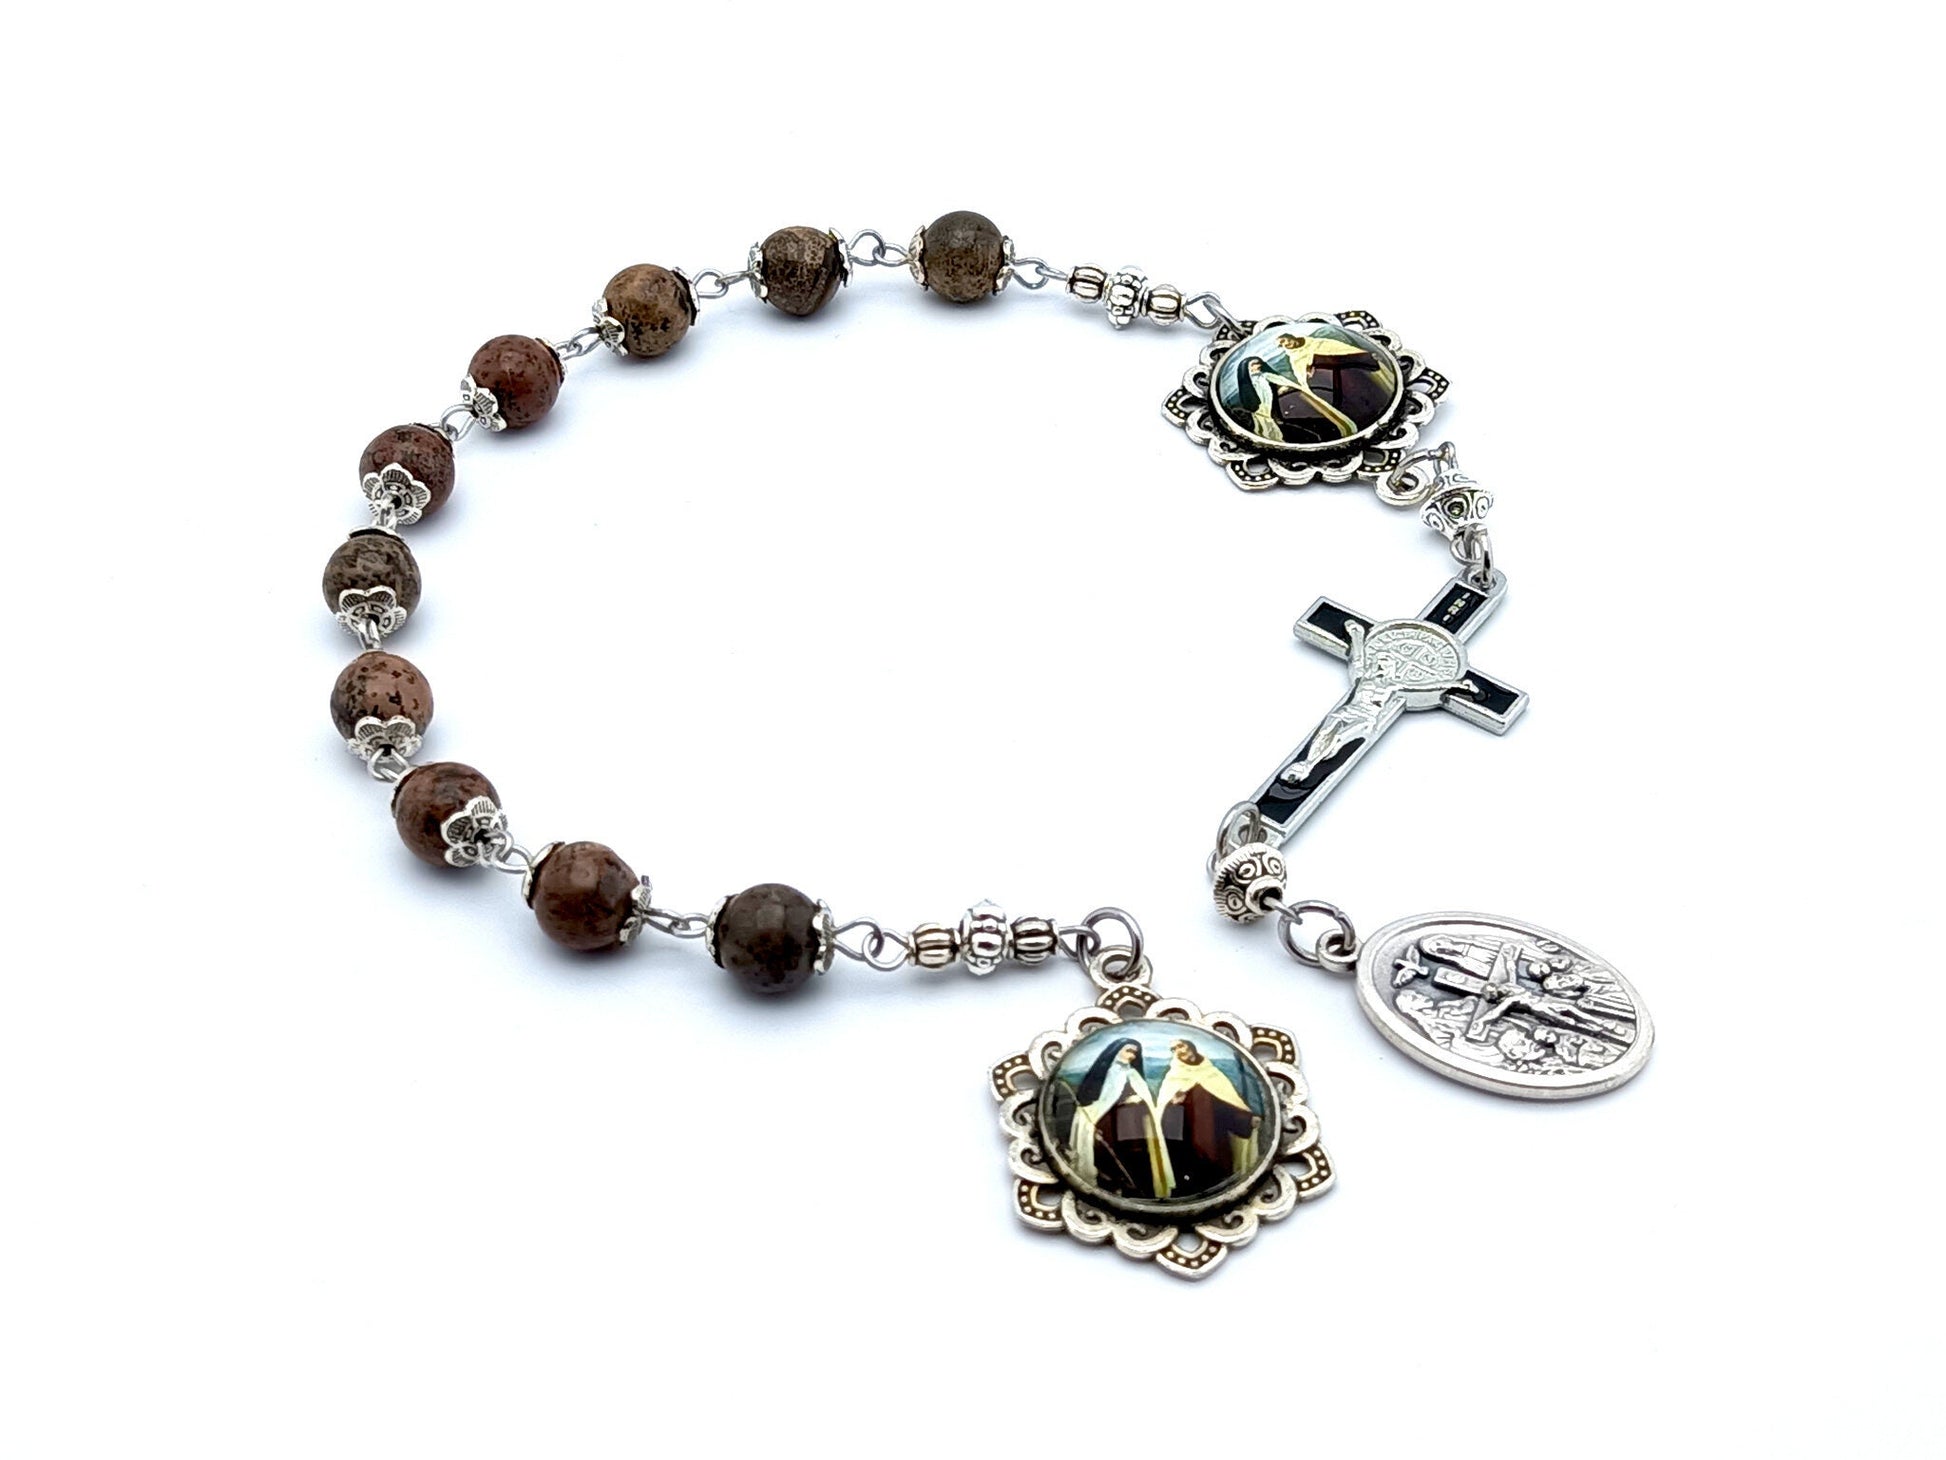 Saint Teresa of Avila unique rosary beads single decade rosary with dark natural gemstone beads, silver and black enamel crucifix and picture centre medal and end medal.